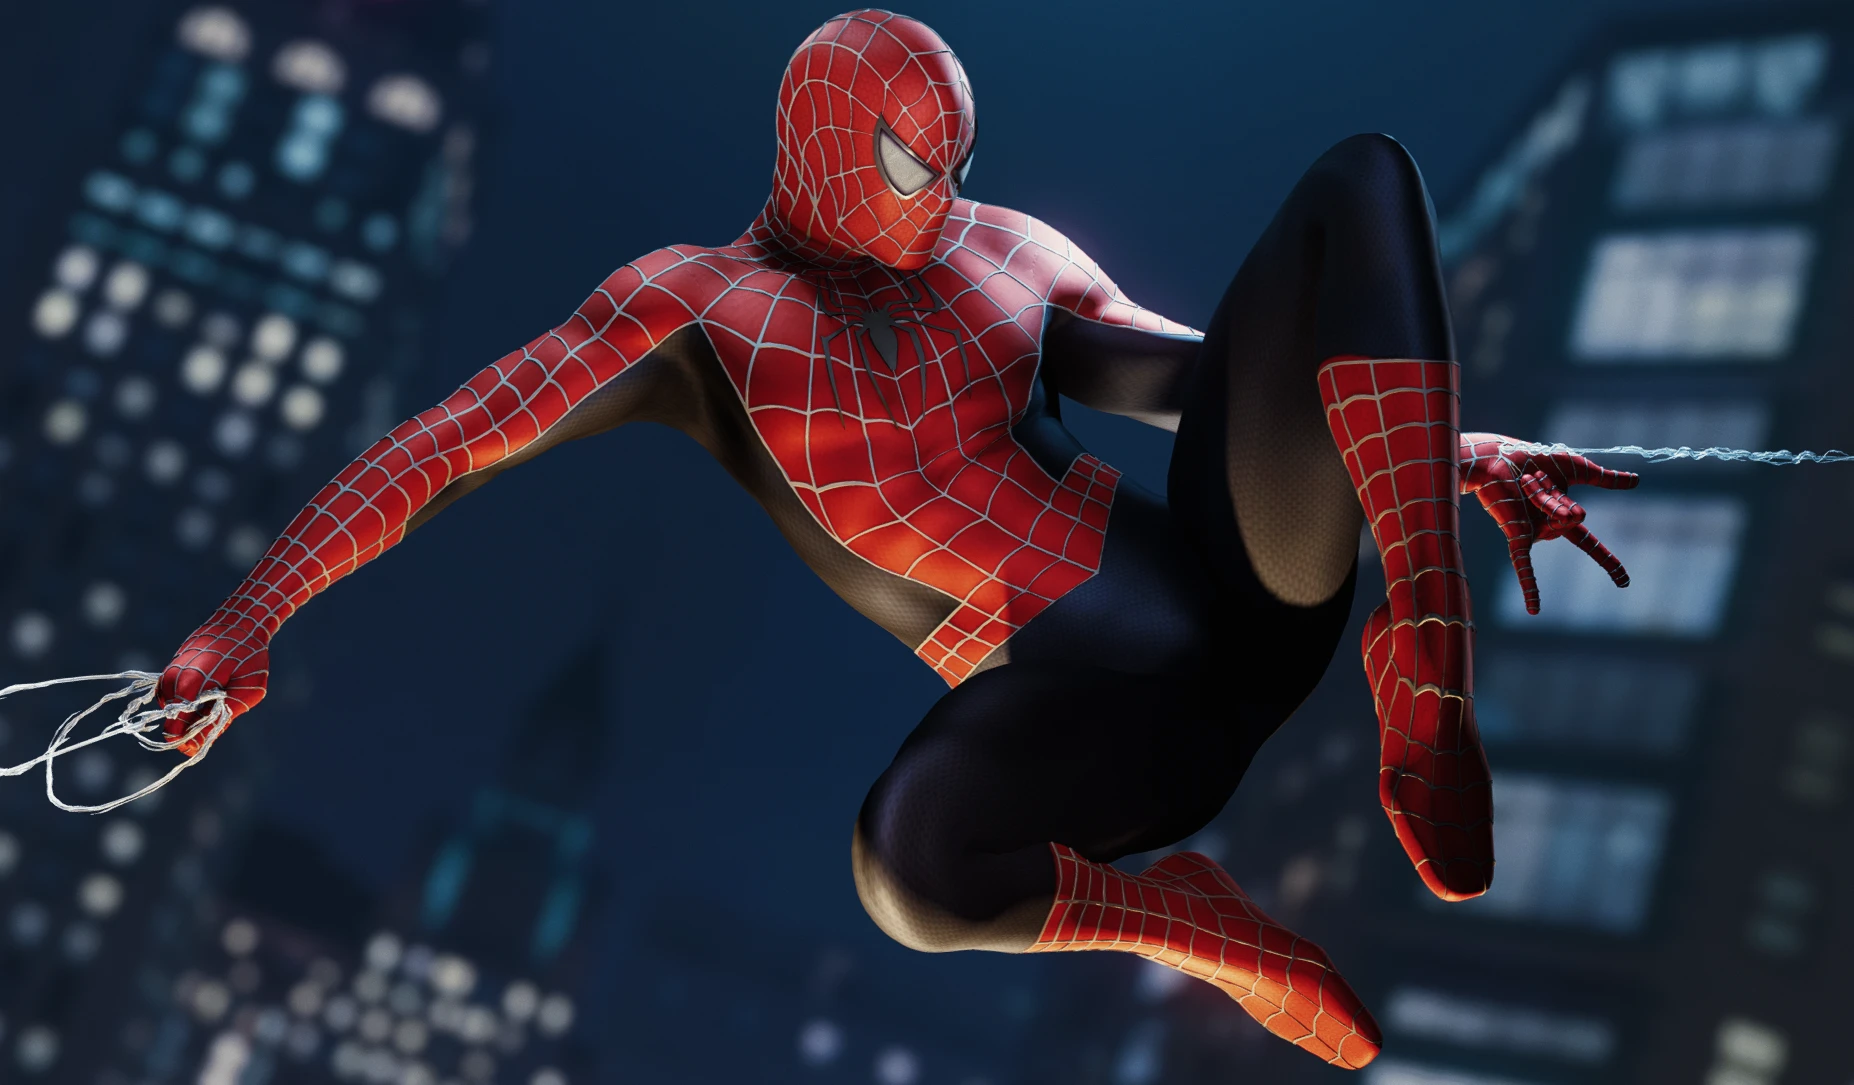 PlayStation Store confirms pre-load date for Marvel's Spider-Man 2 - Xfire